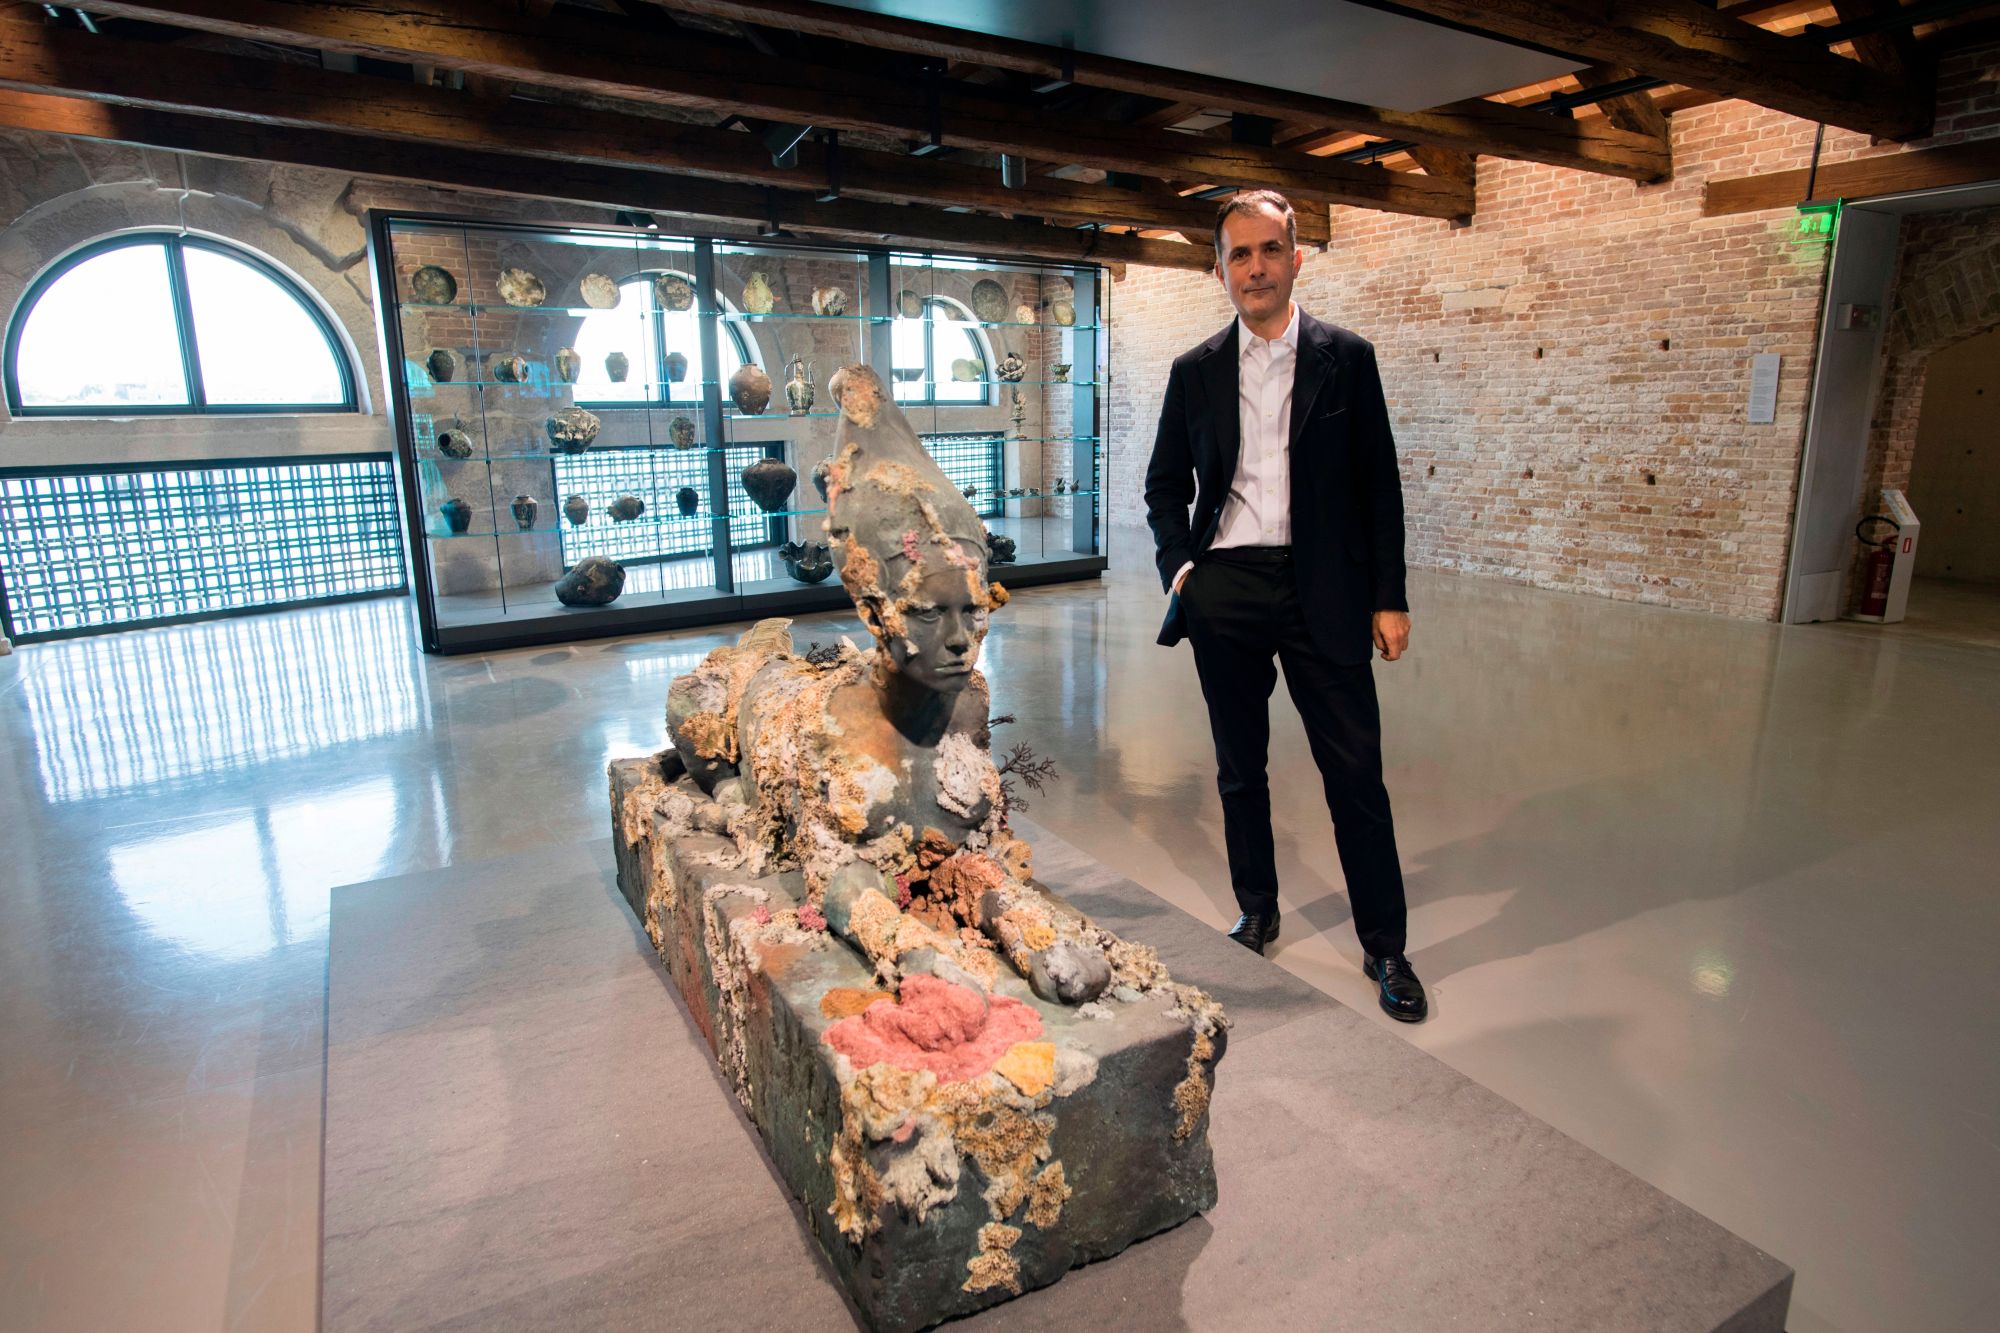 Palazzo Grassi & Punta della Dogana director, Martin Bethenod poses next to the "Sphinx" by British artist Damien Hirst during the press presentation of his exhibition "Treasures from the Wreck of the Unbelievable" at the Pinault Collection in Punta della Dogana and Palazzo Grassi in Venice on April 6, 2017. / AFP PHOTO / MIGUEL MEDINA / RESTRICTED TO EDITORIAL USE - MANDATORY MENTION OF THE ARTIST UPON PUBLICATION - TO ILLUSTRATE THE EVENT AS SPECIFIED IN THE CAPTION        (Photo credit should read MIGUEL MEDINA/AFP via Getty Images)